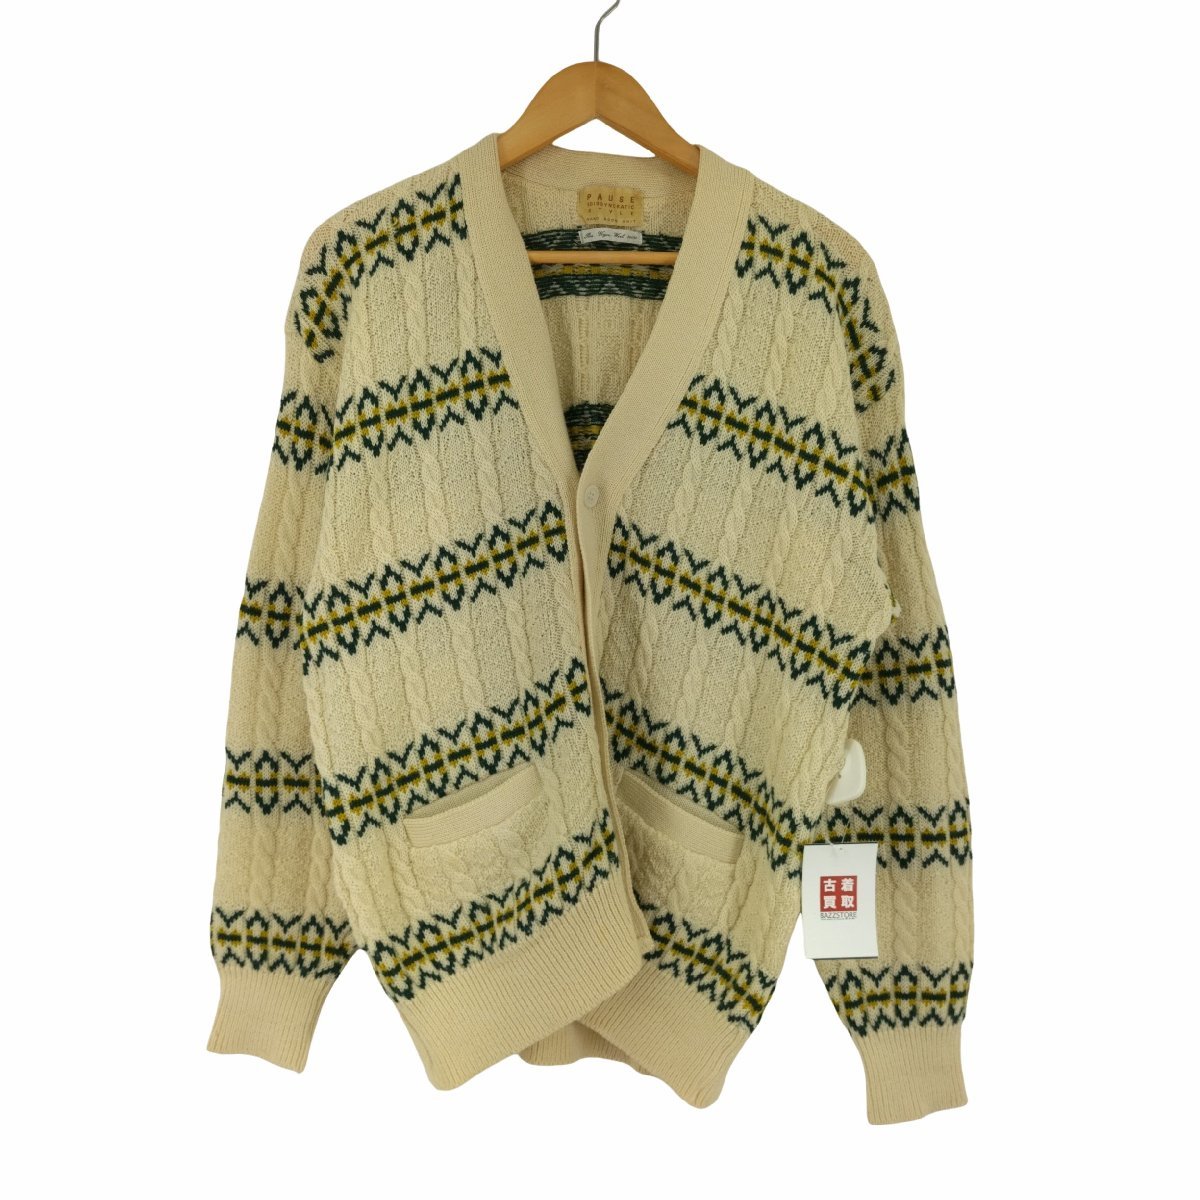 USED古着(ユーズドフルギ) PAUSE IDIOSYNCRATIC HAND ROOM KNIT 中古 古着 0923